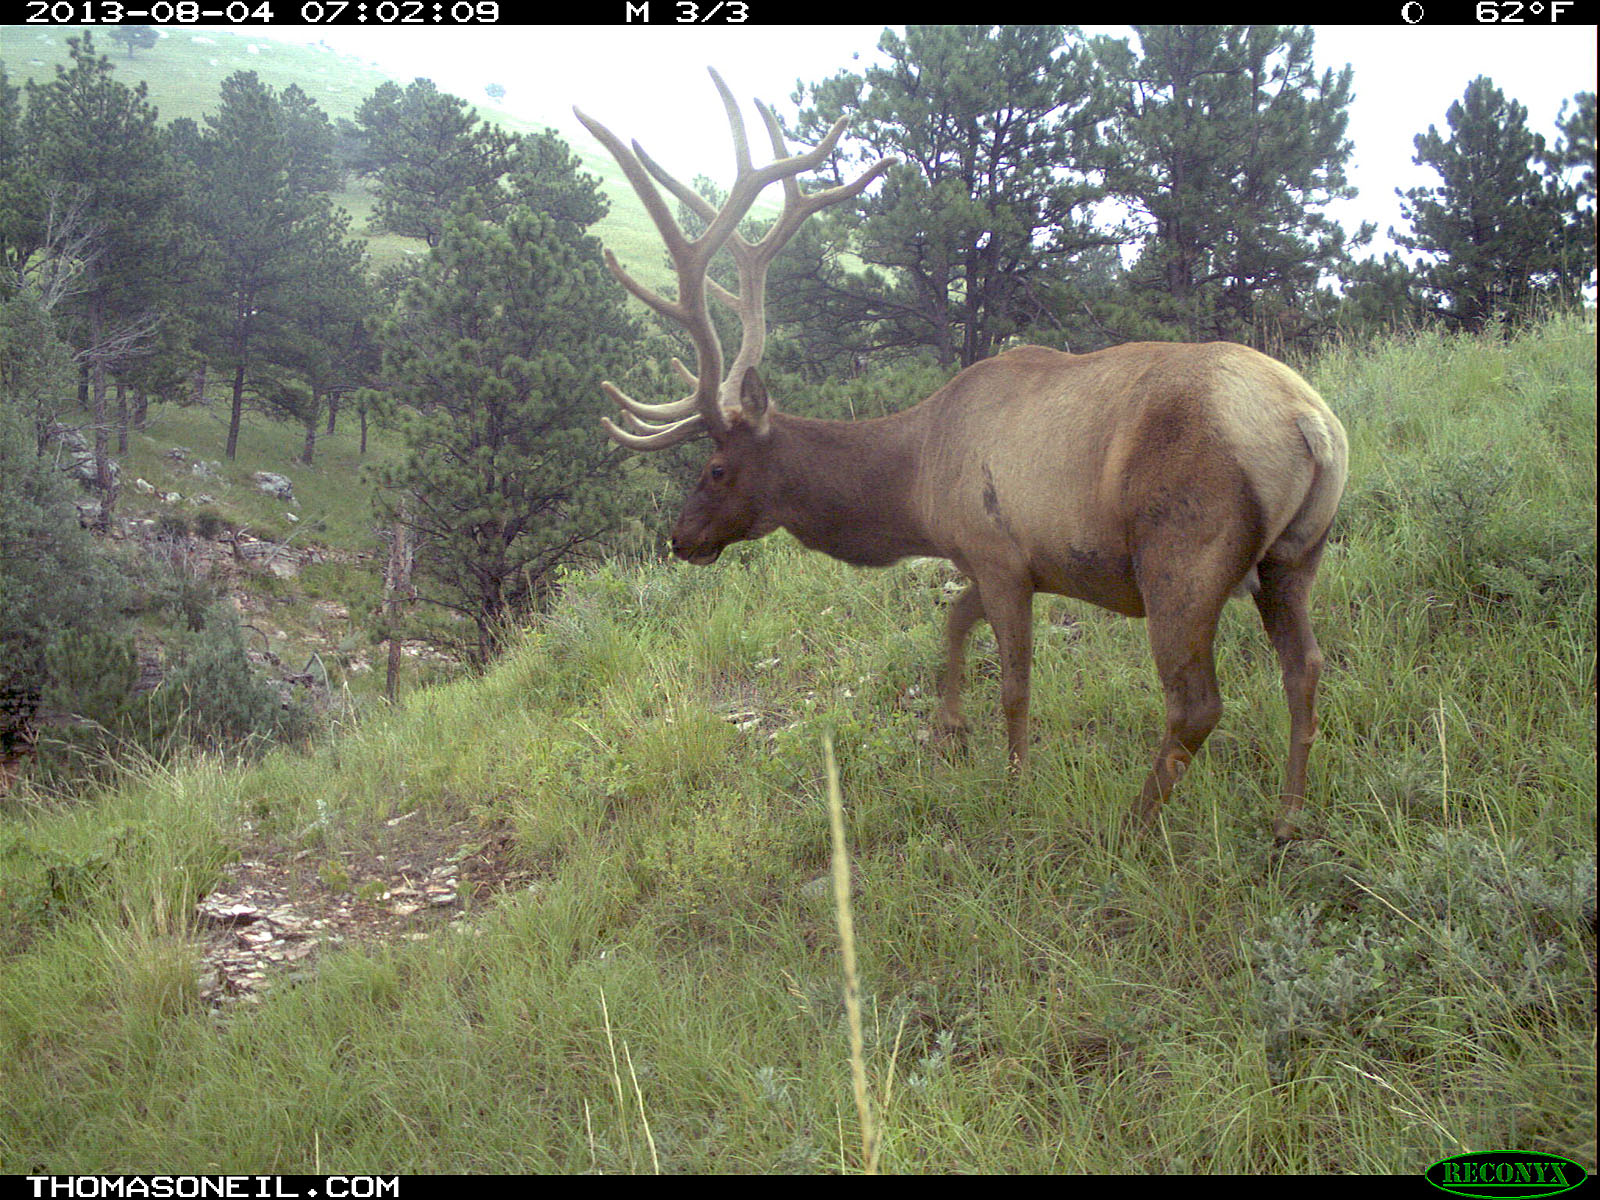 Elk on trail camera, Wind Cave National Park, South Dakota, August 8, 2013.  Click for next photo.